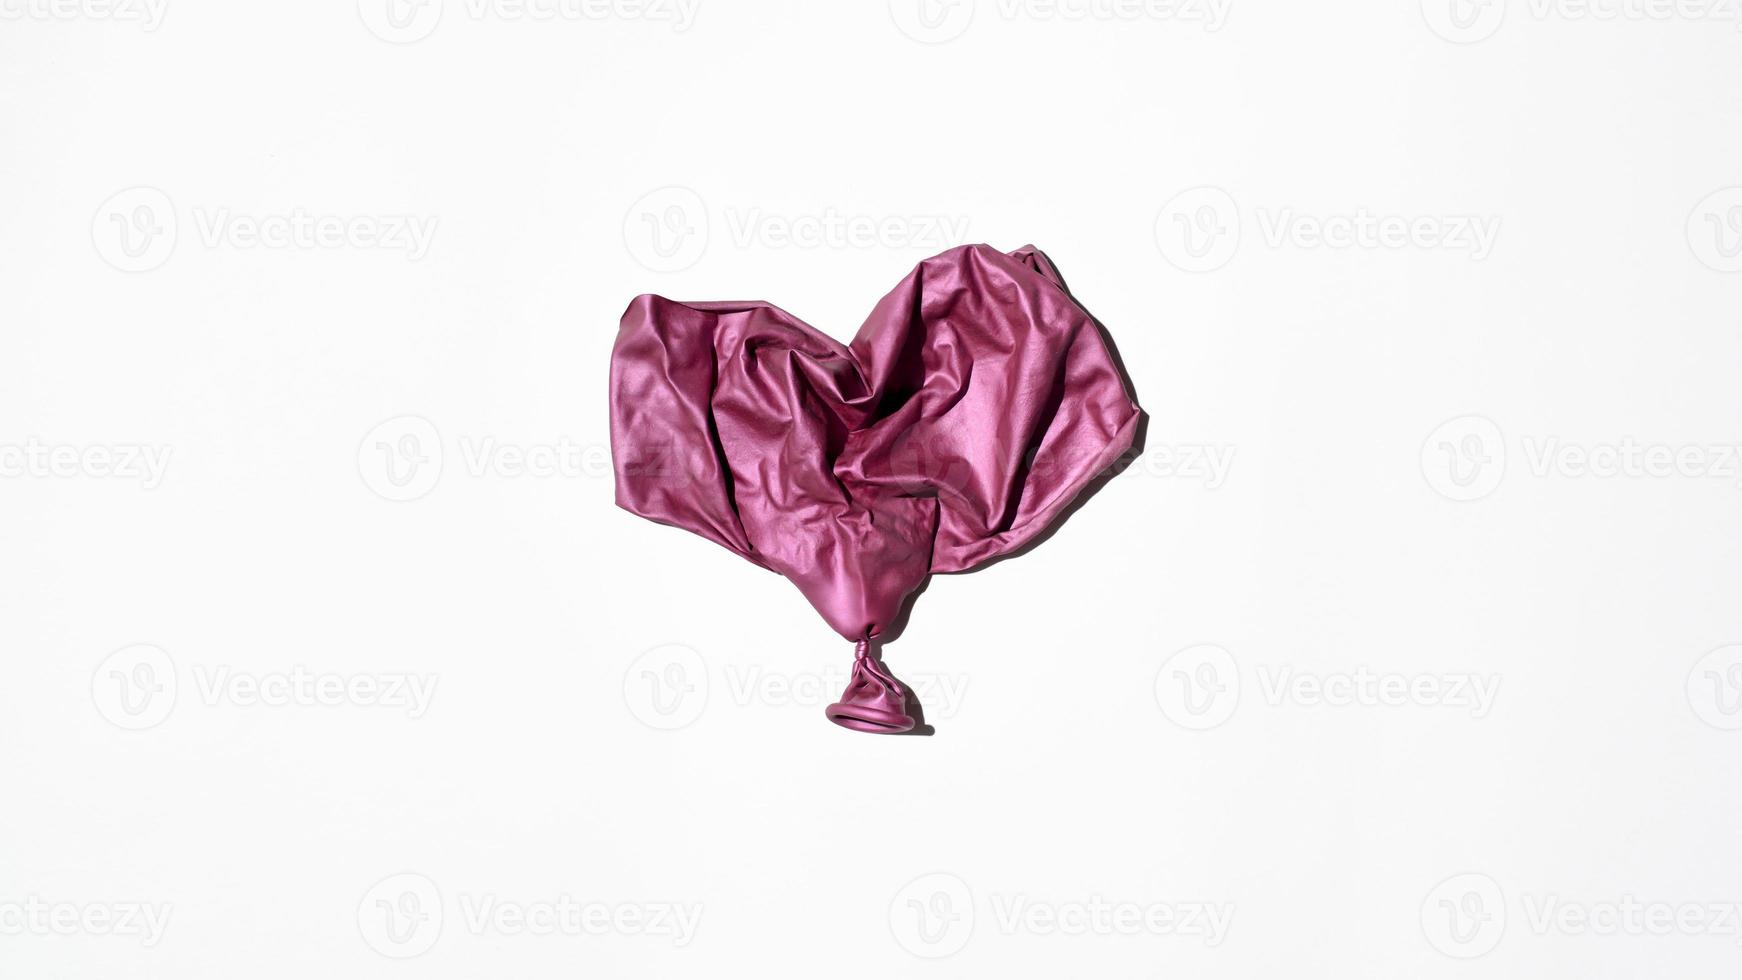 Burst balloon in the shape of a heart on a white background, top view photo